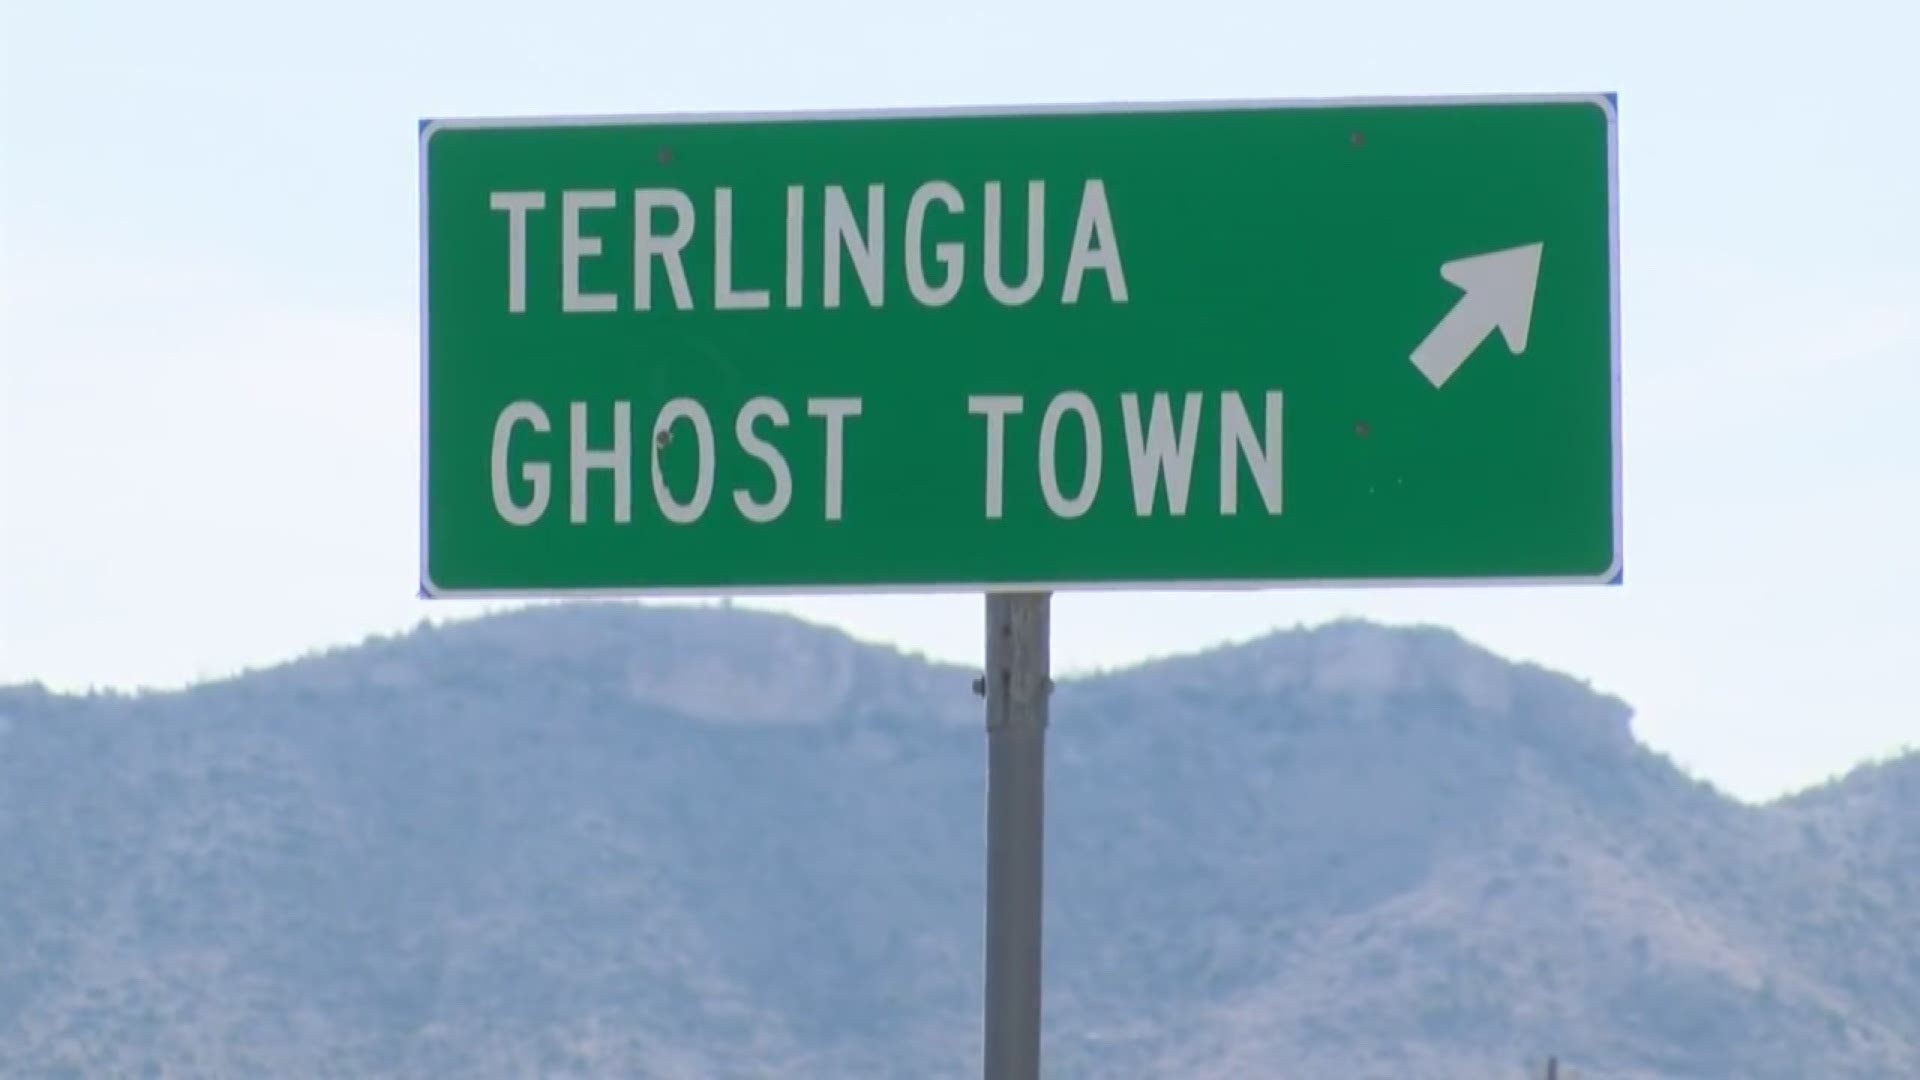 Terlingua in the past reveals a haunting ghost town.